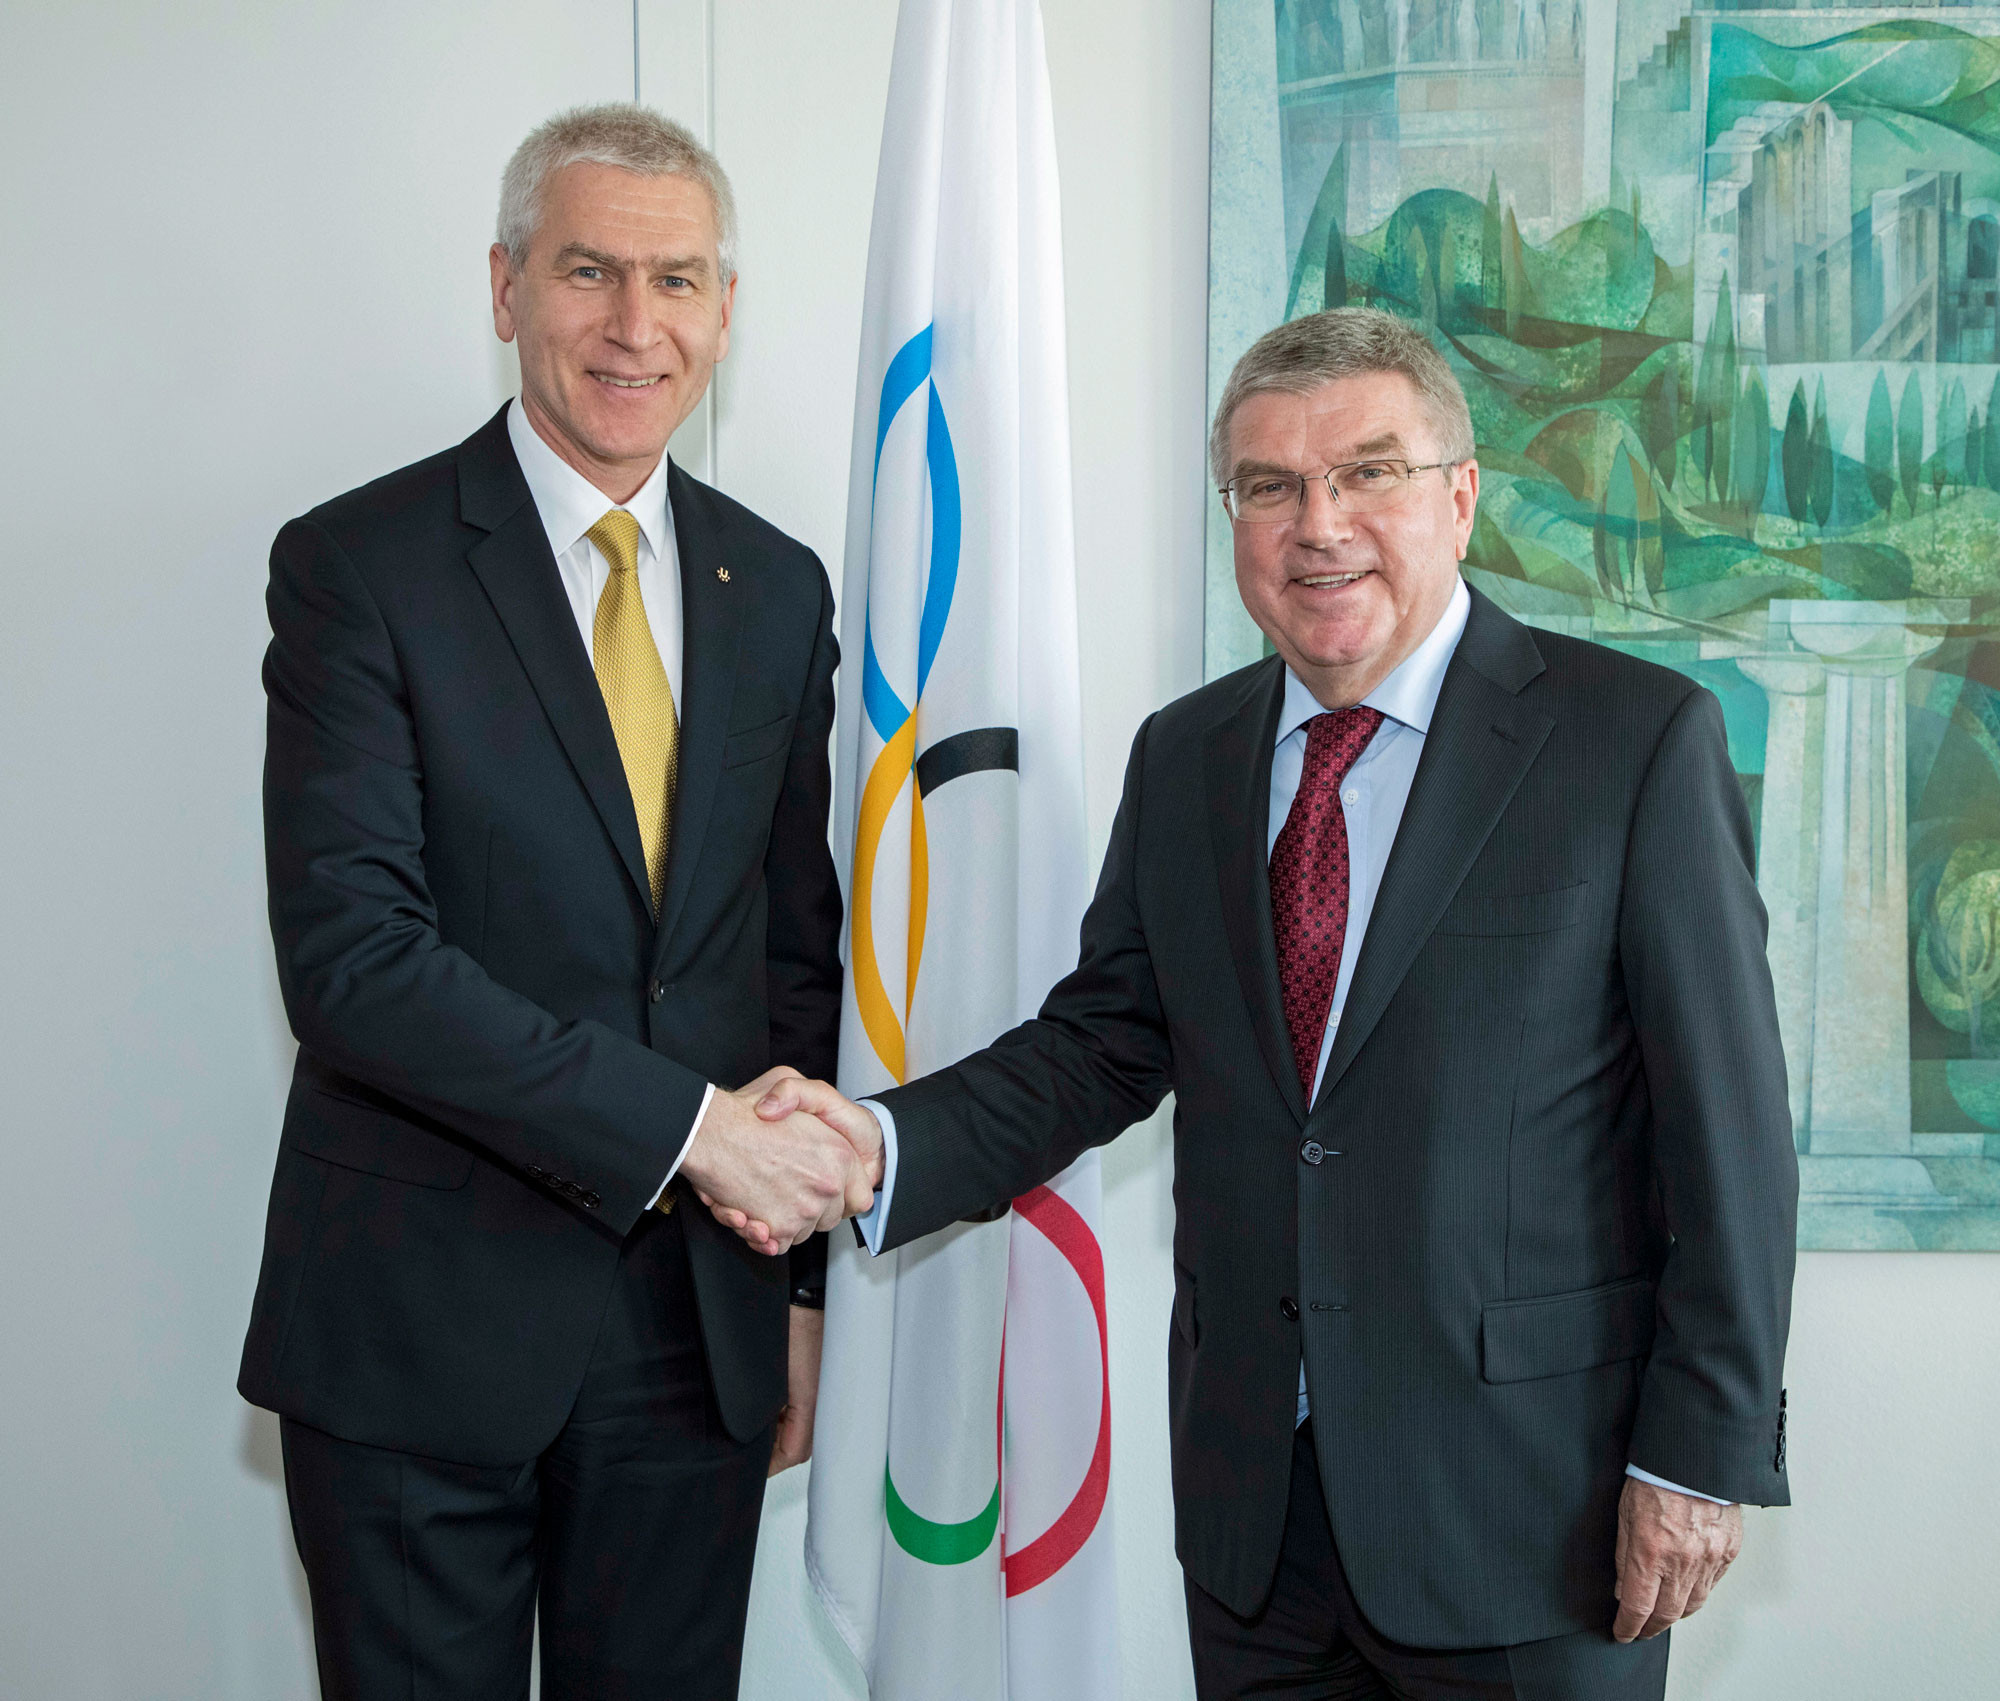 FISU and IOC Presidents discuss career development for athletes during Lausanne meeting